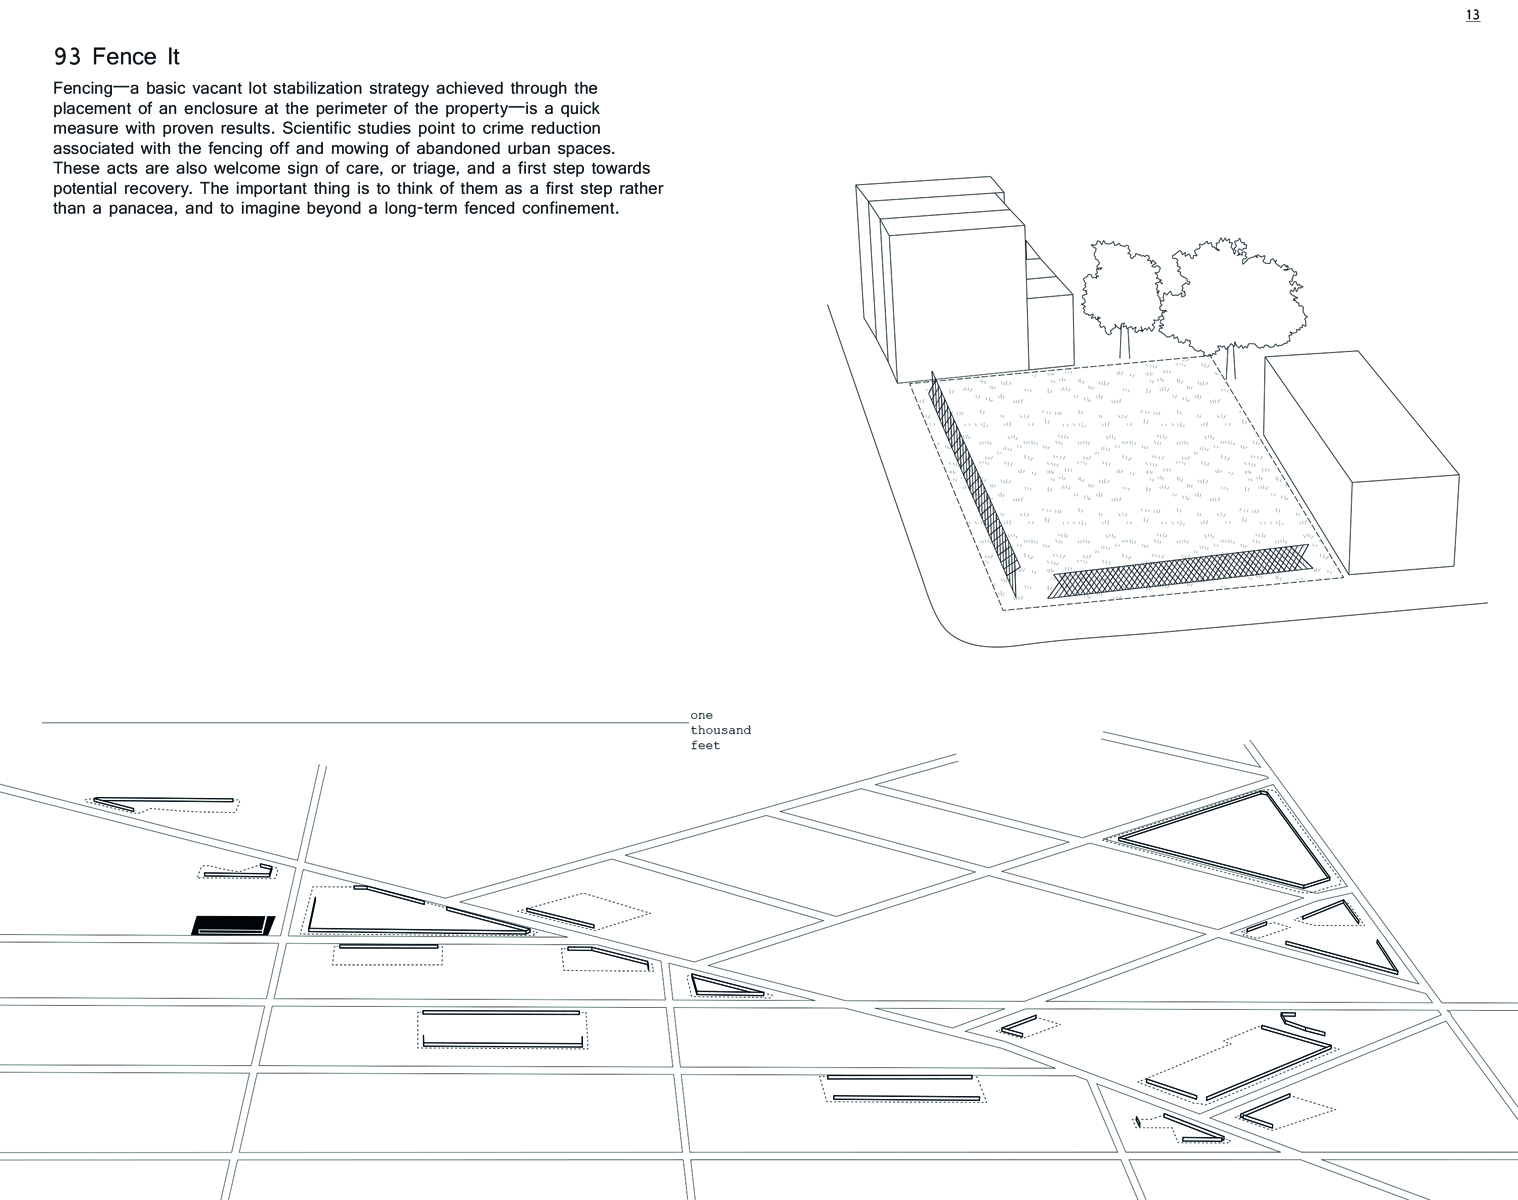 Aerial architecture landscape plan in white, on grey cover, From Fallow 100 Ideas for Abandoned Urban Landscapes in pale grey font above